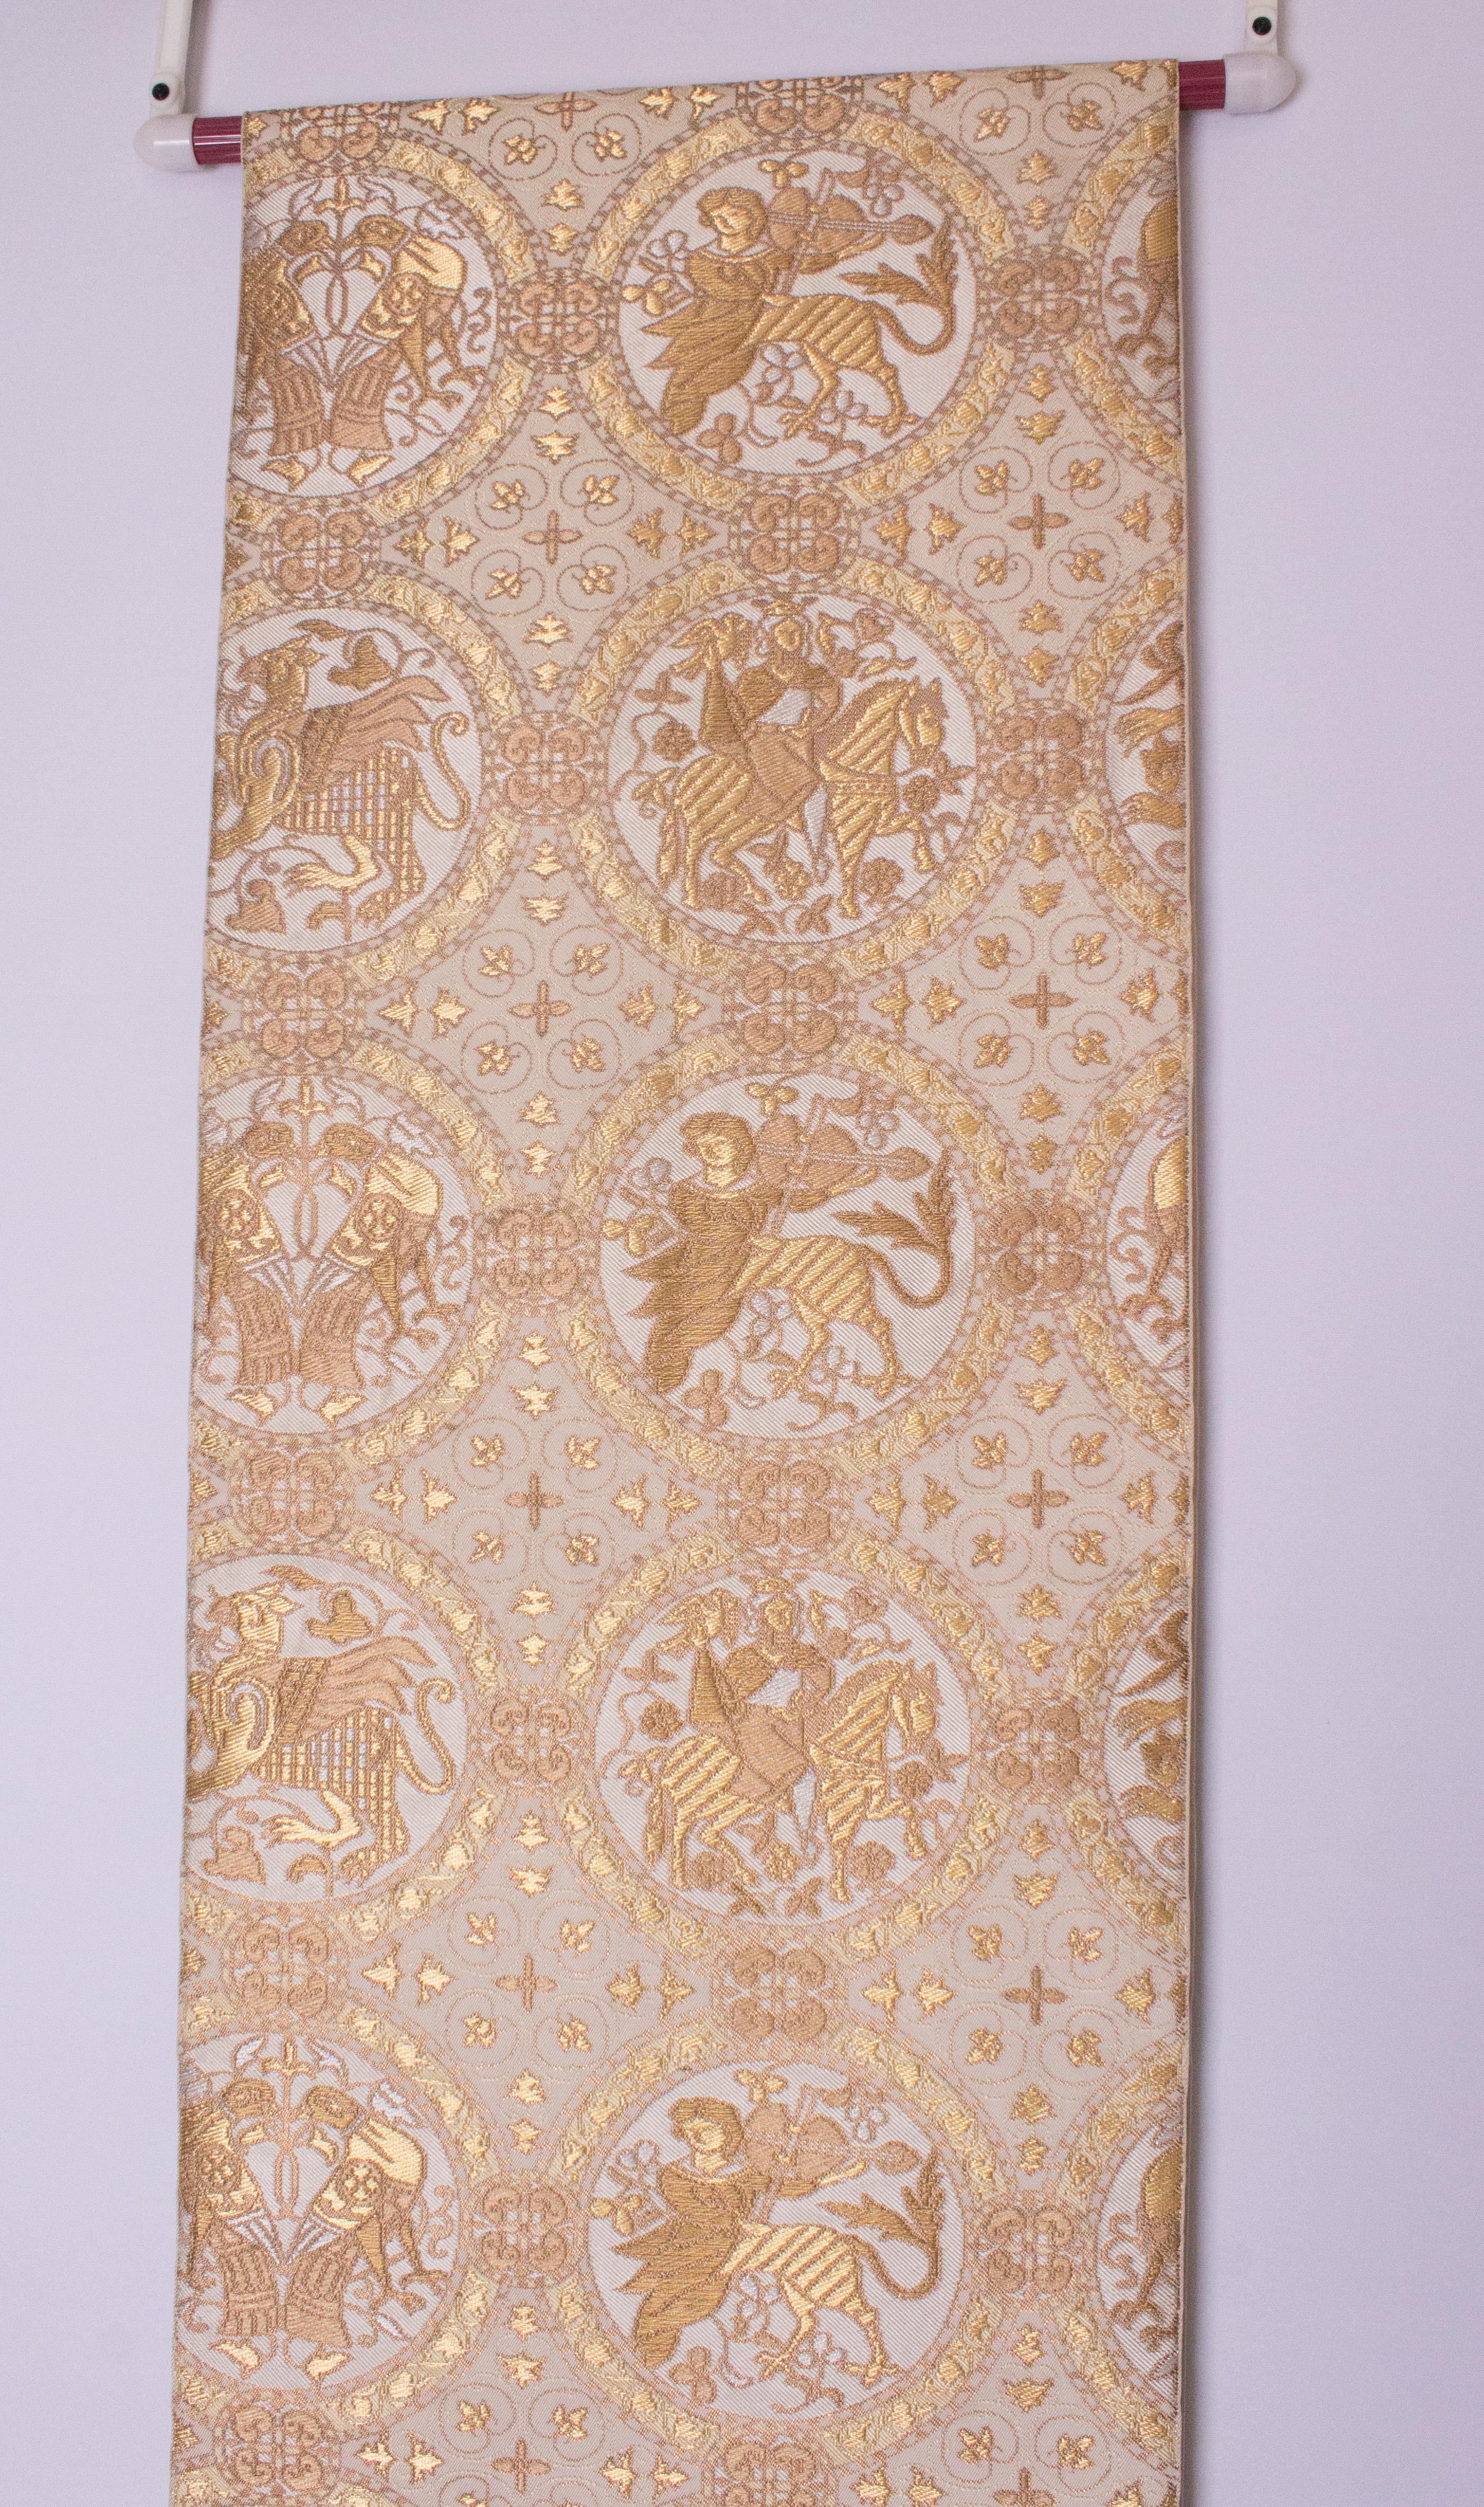 A chic silk obi belt in a gold heraldic design. The belt has an ivory background, with a gold heraldic print. The belt measures 173'' long and 12 1/2 in height. The embroidered parts are 110'' and 18 1/2'' long.